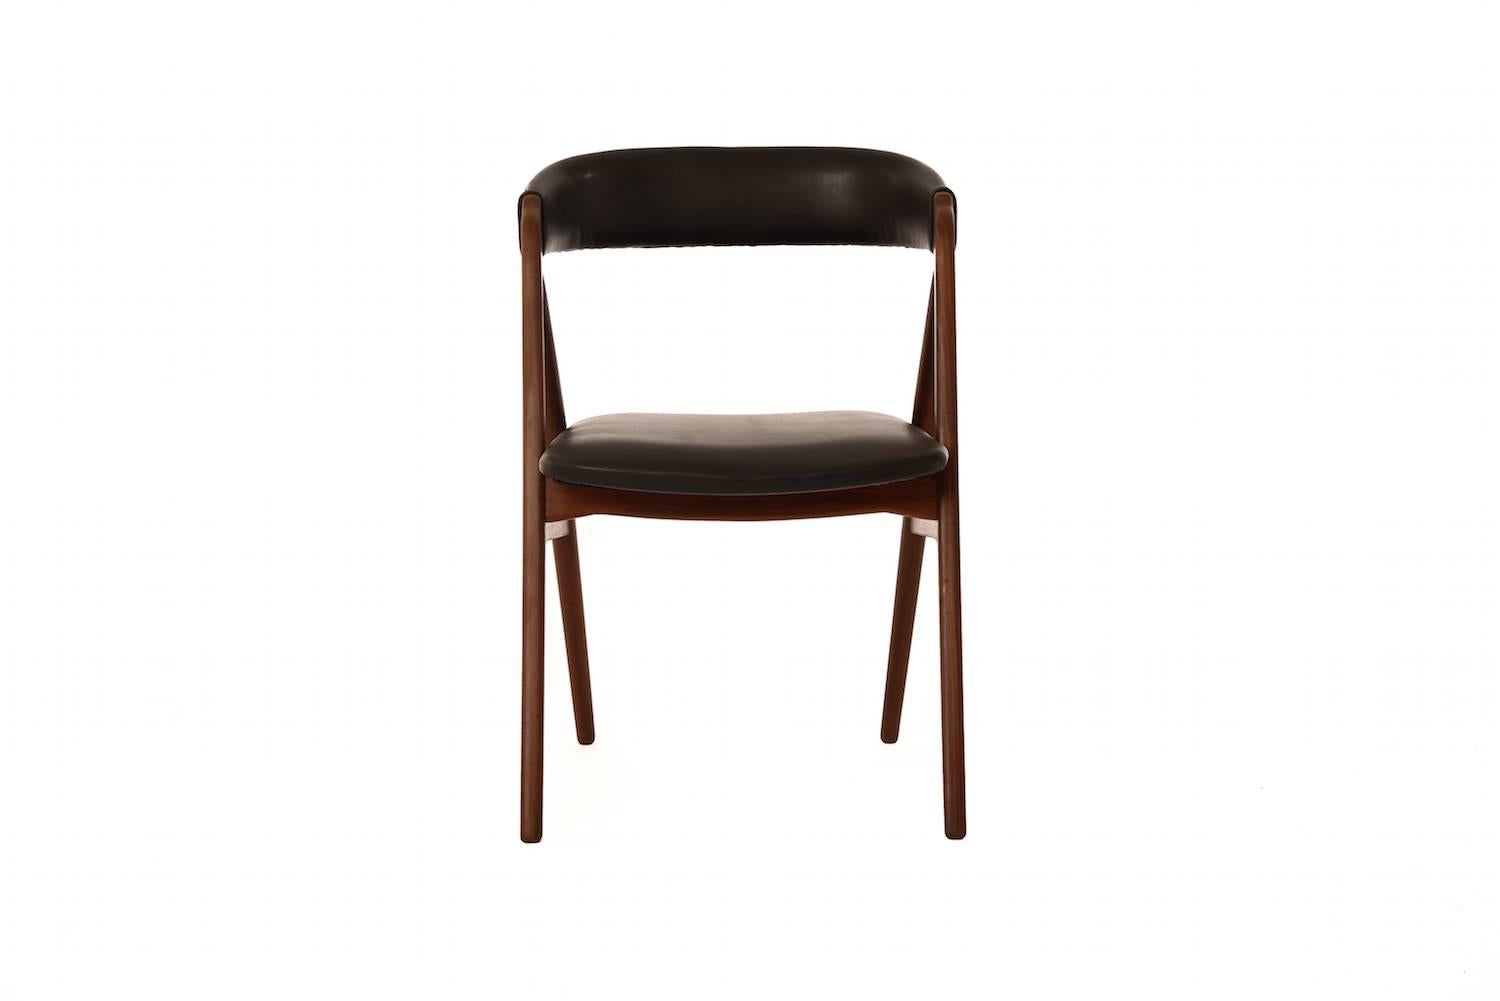 Twelve vintage Danish Modern dining chairs in teak and new recycled leather upholstery. Priced per chair.  Please inquire about set pricing.

Professional, skilled furniture restoration is an integral part of what we do every day. Our goal is to